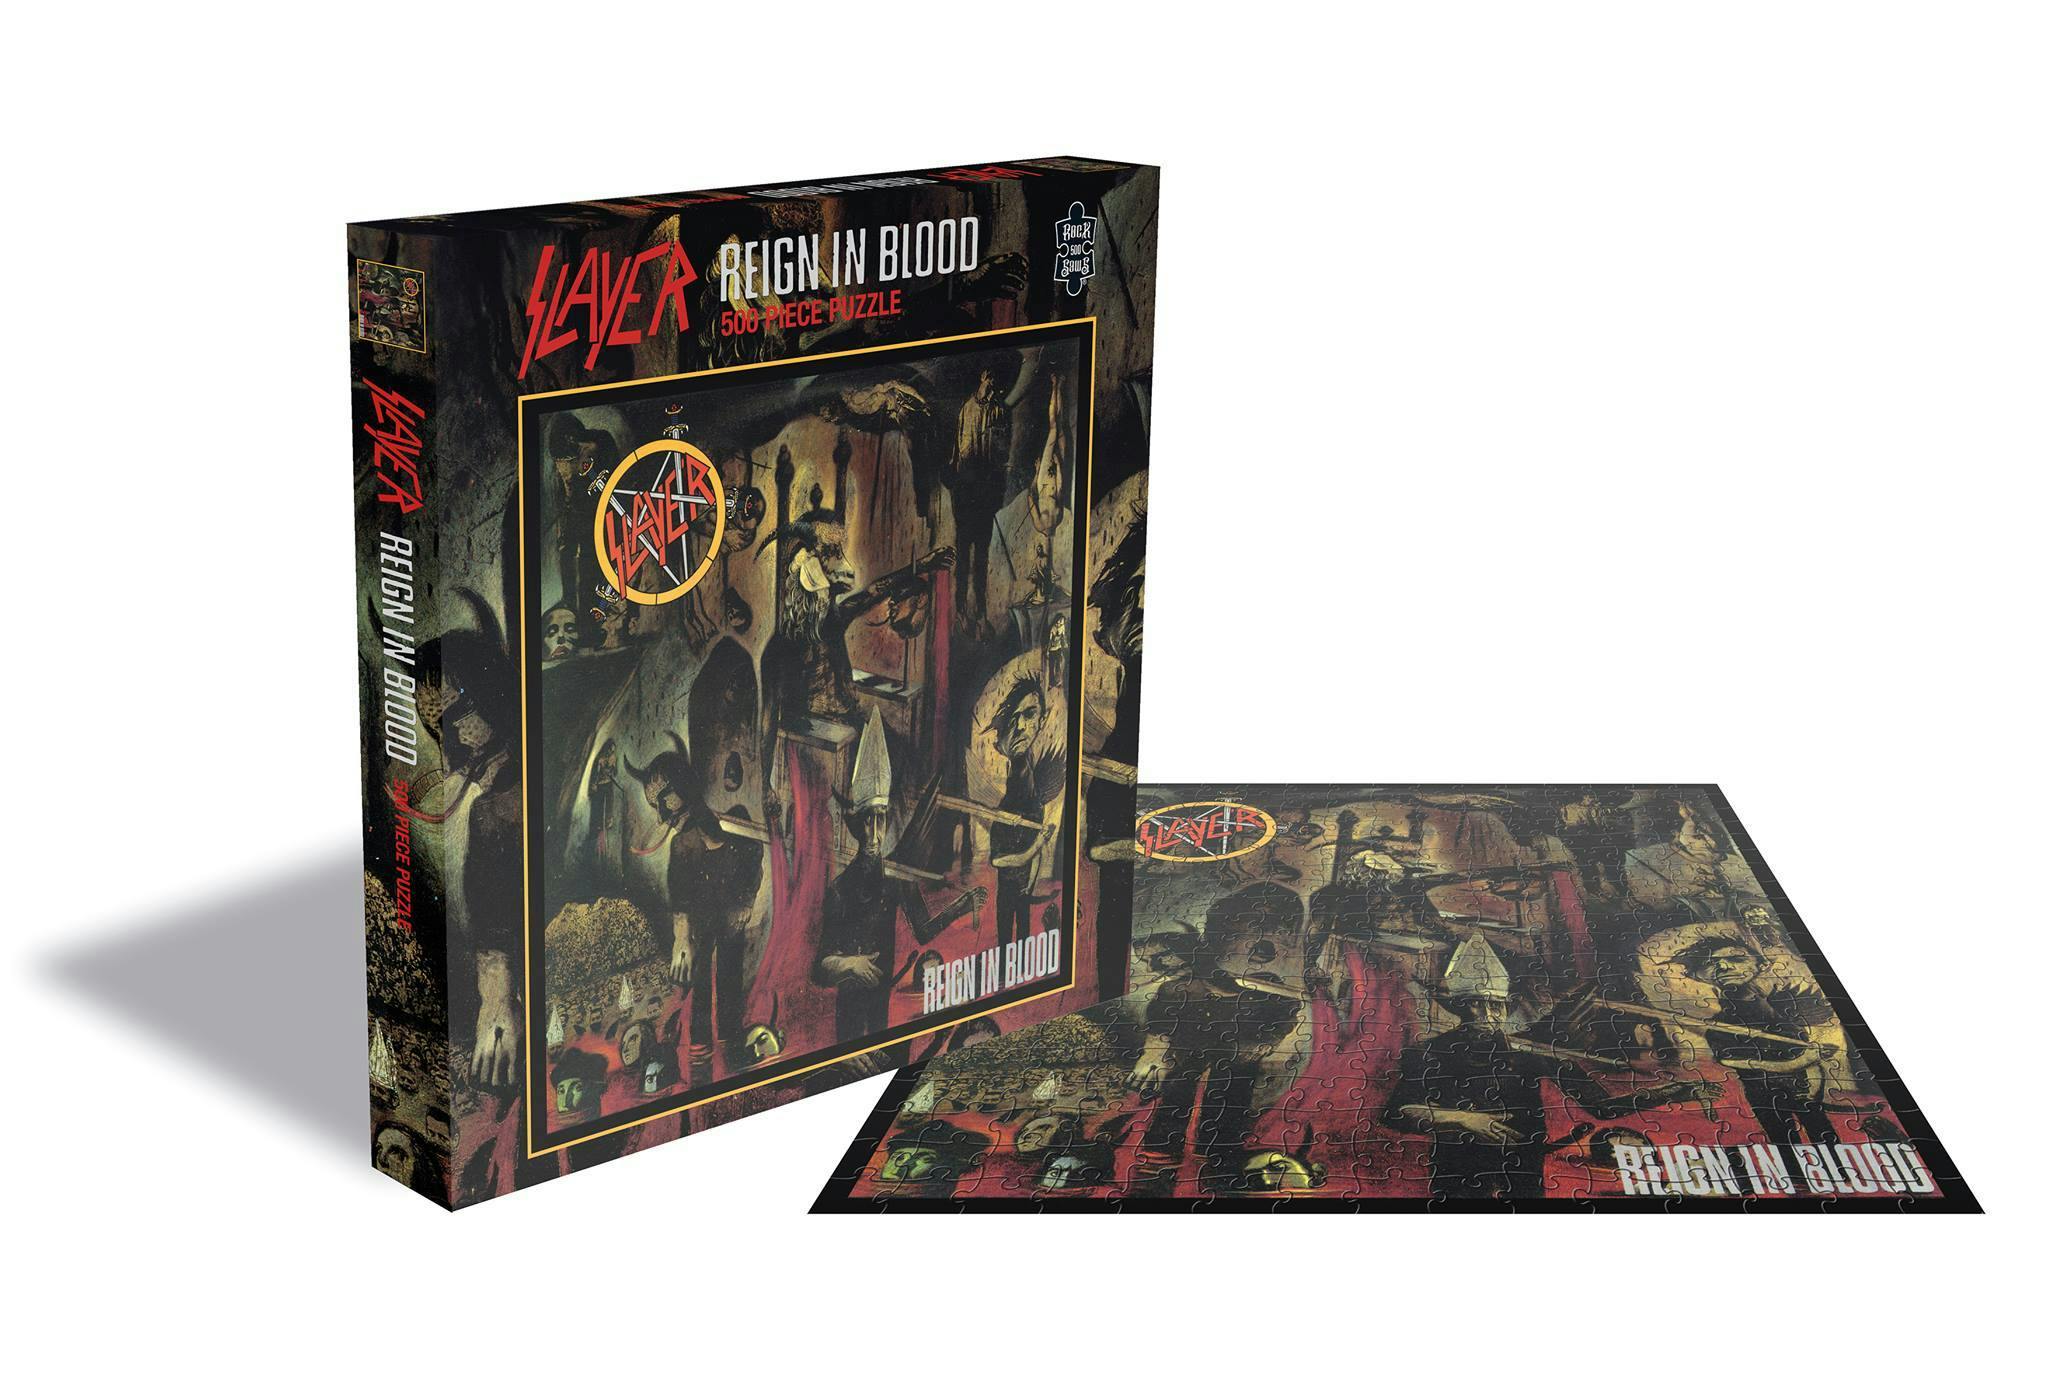 Slayer, Iron Maiden, Motörhead, and Judas Priest Jigsaw Puzzles Now Available